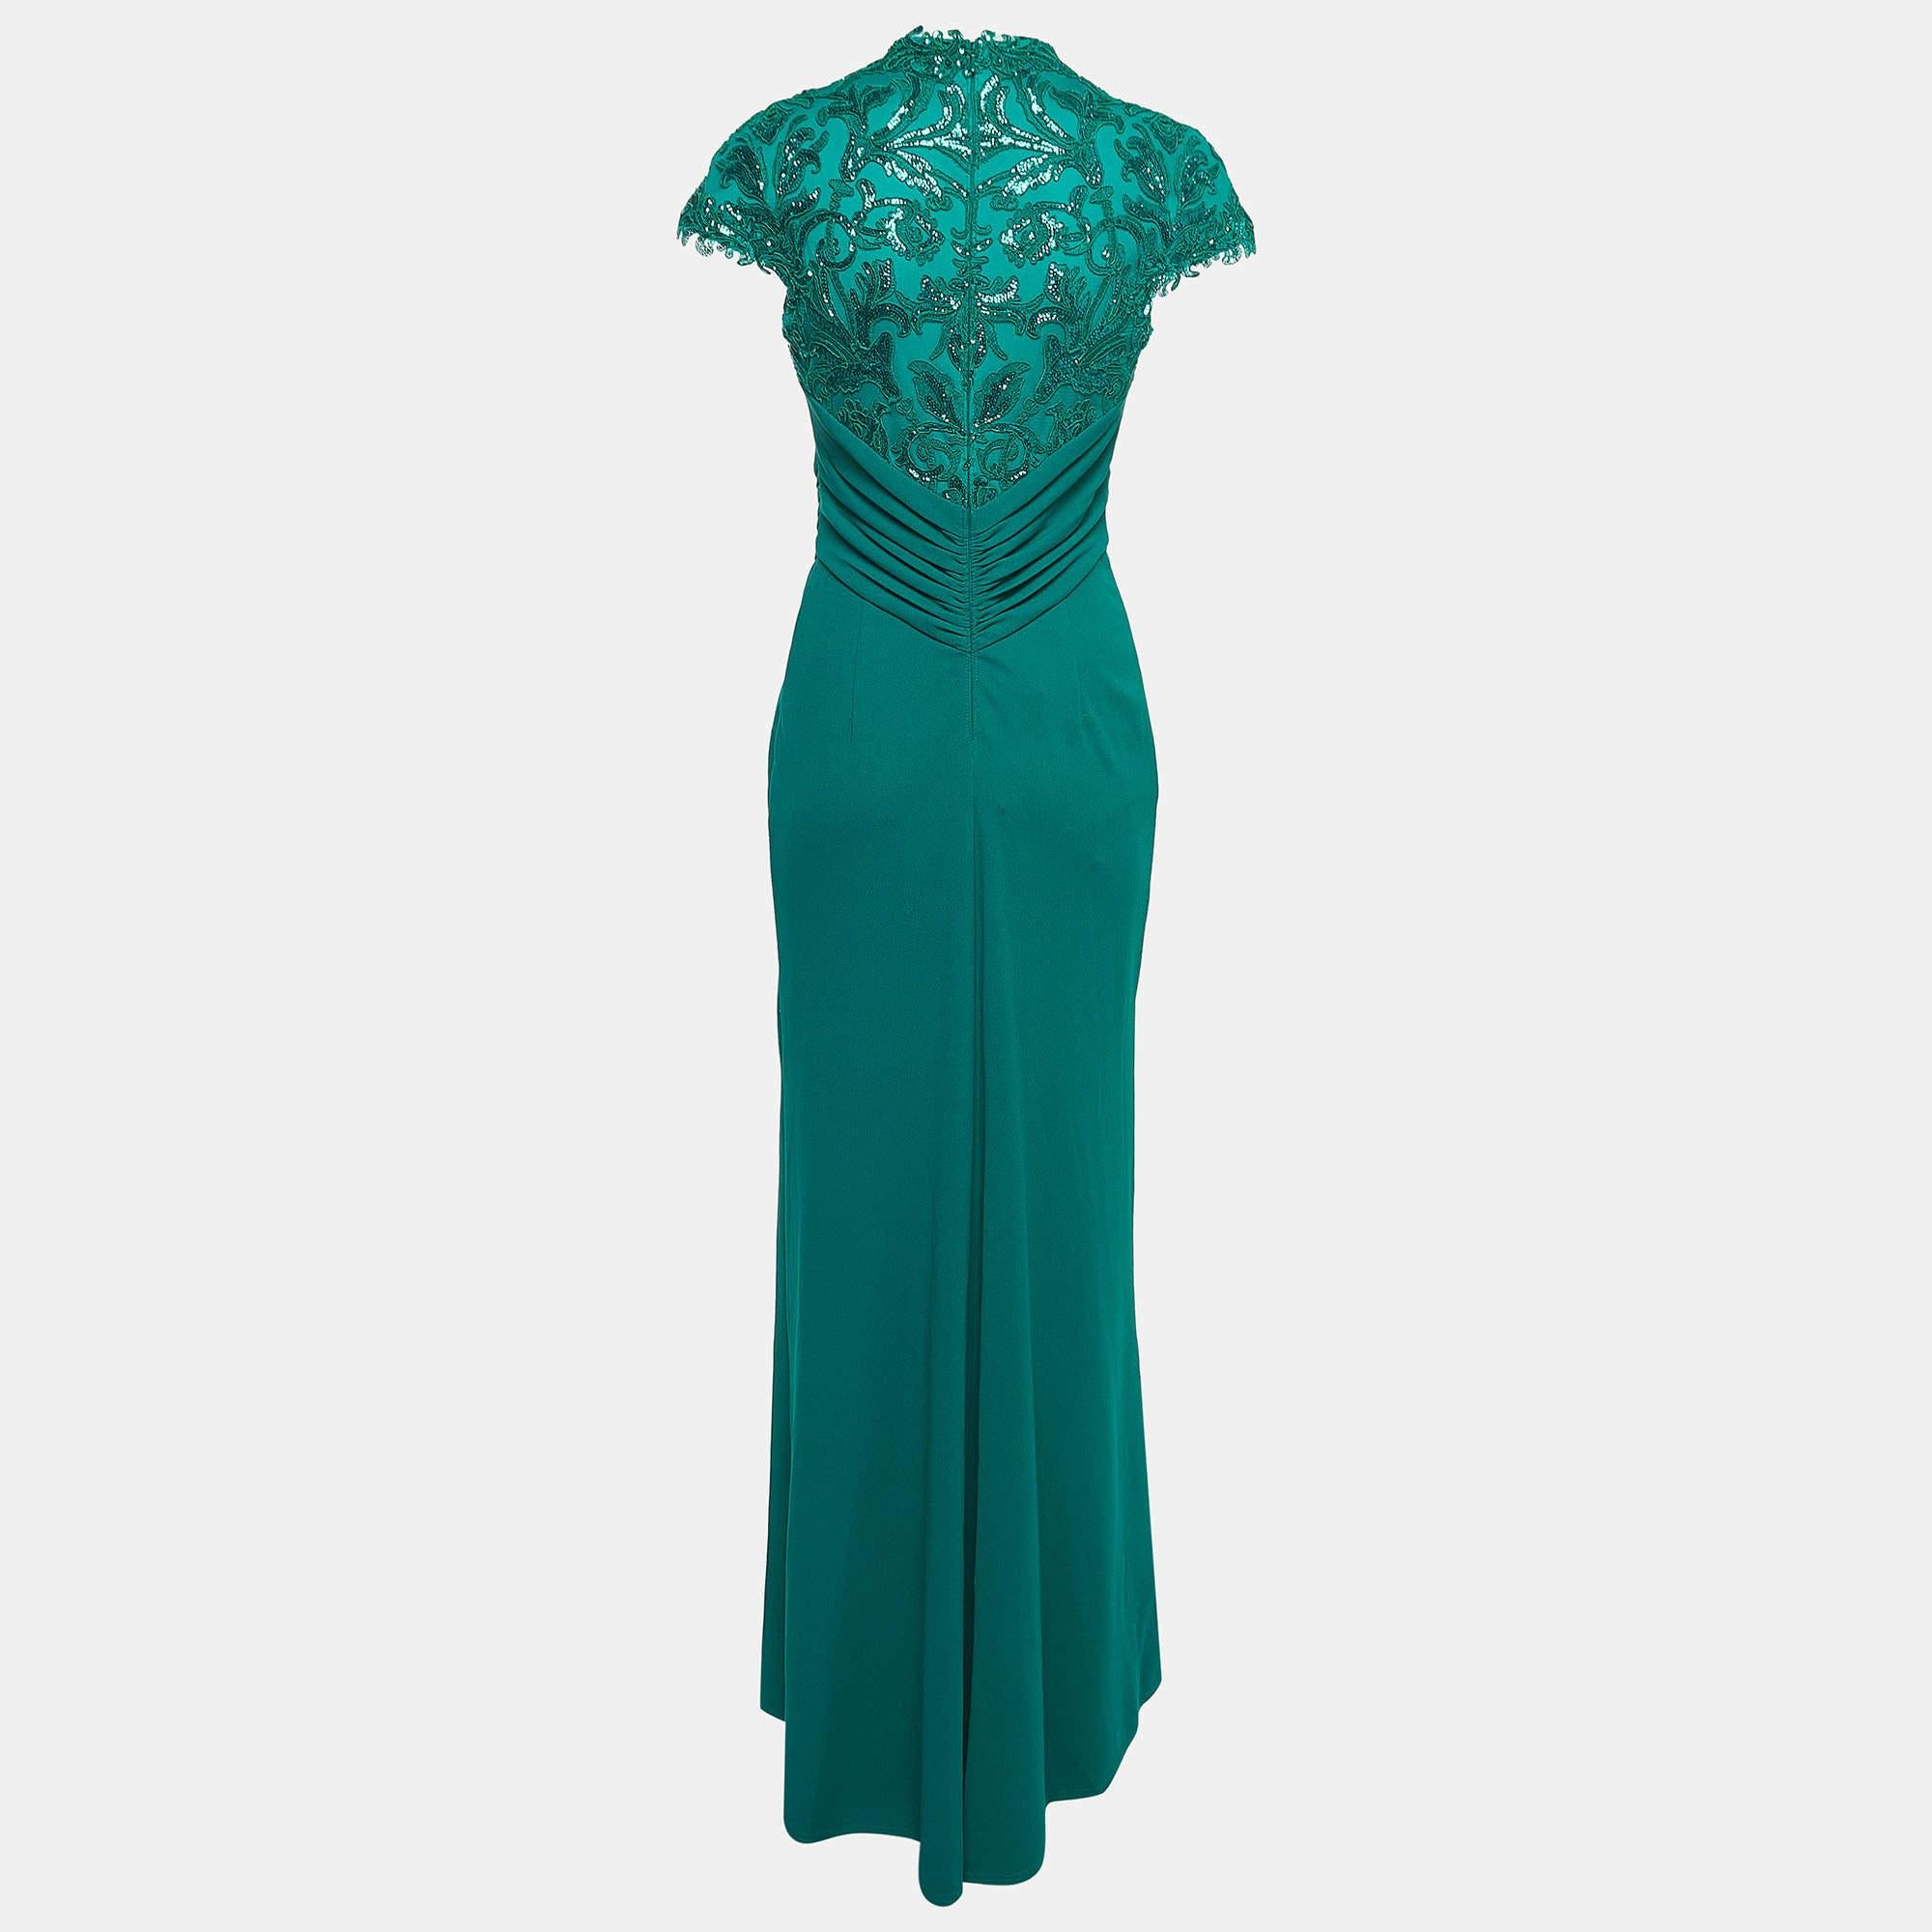 Resplendent, elegant, and gorgeous, this gown defines it all. It is beautified using stunning details and a stylish neckline. Wear it with statement accessories and a defining clutch.

